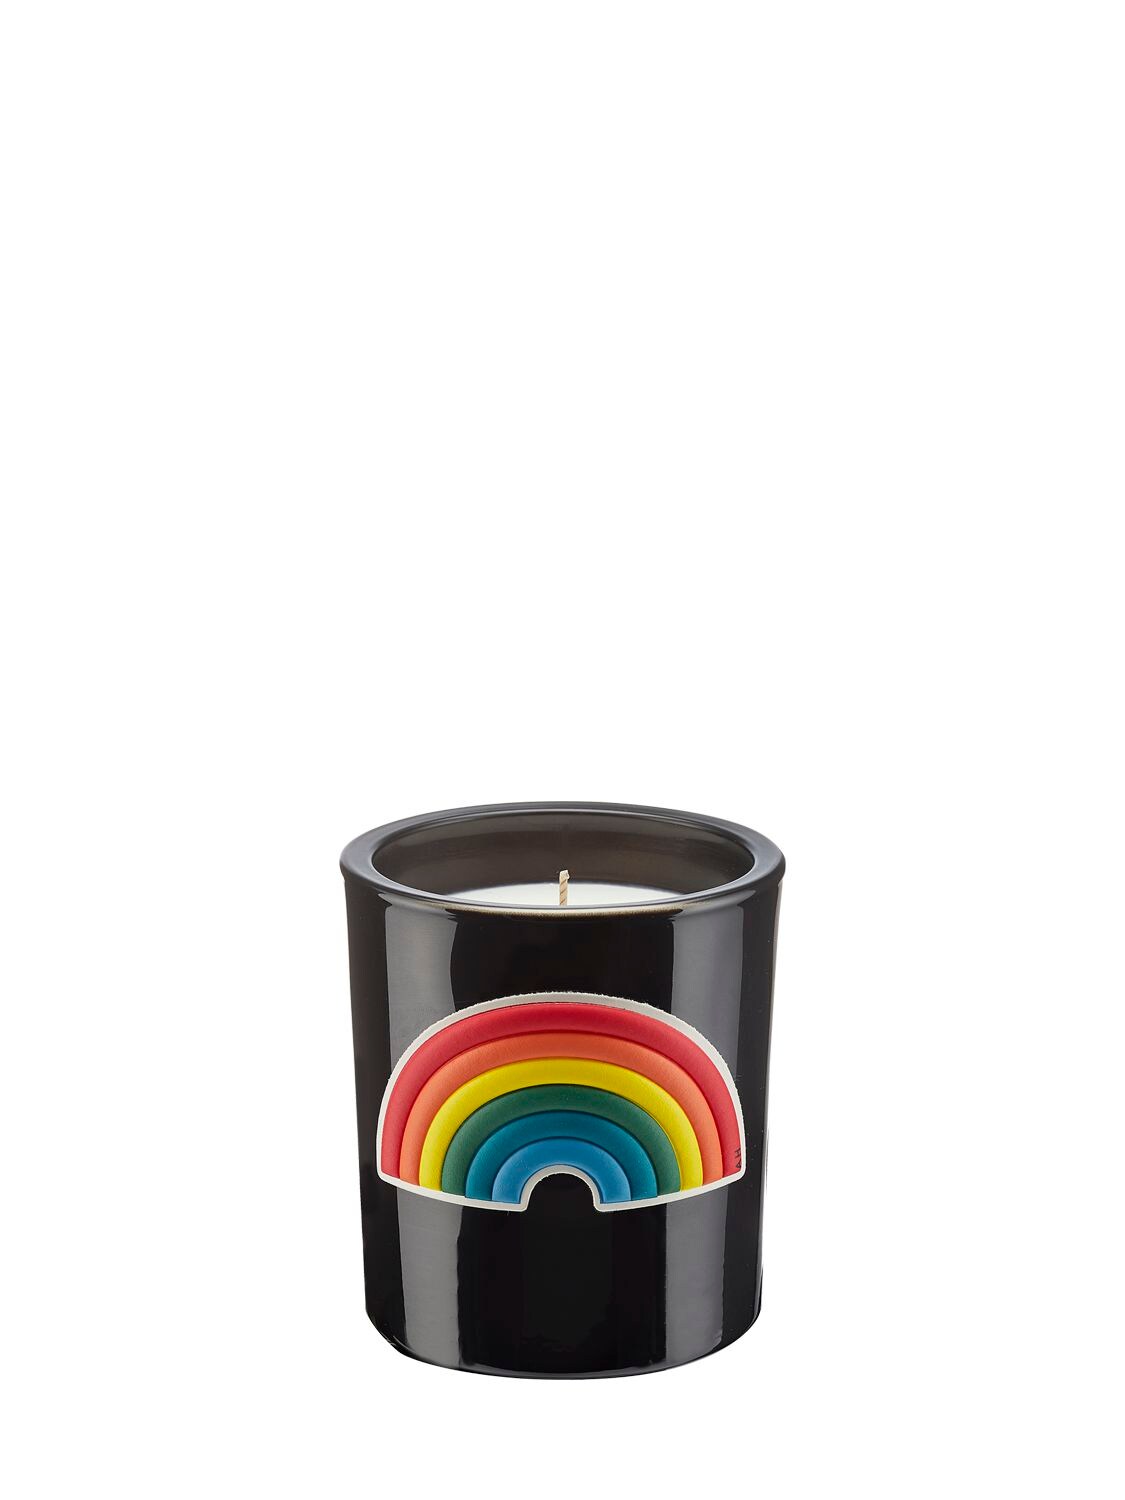 Anya Hindmarch Smells 175gr Washing Powder Scented Candle In Black